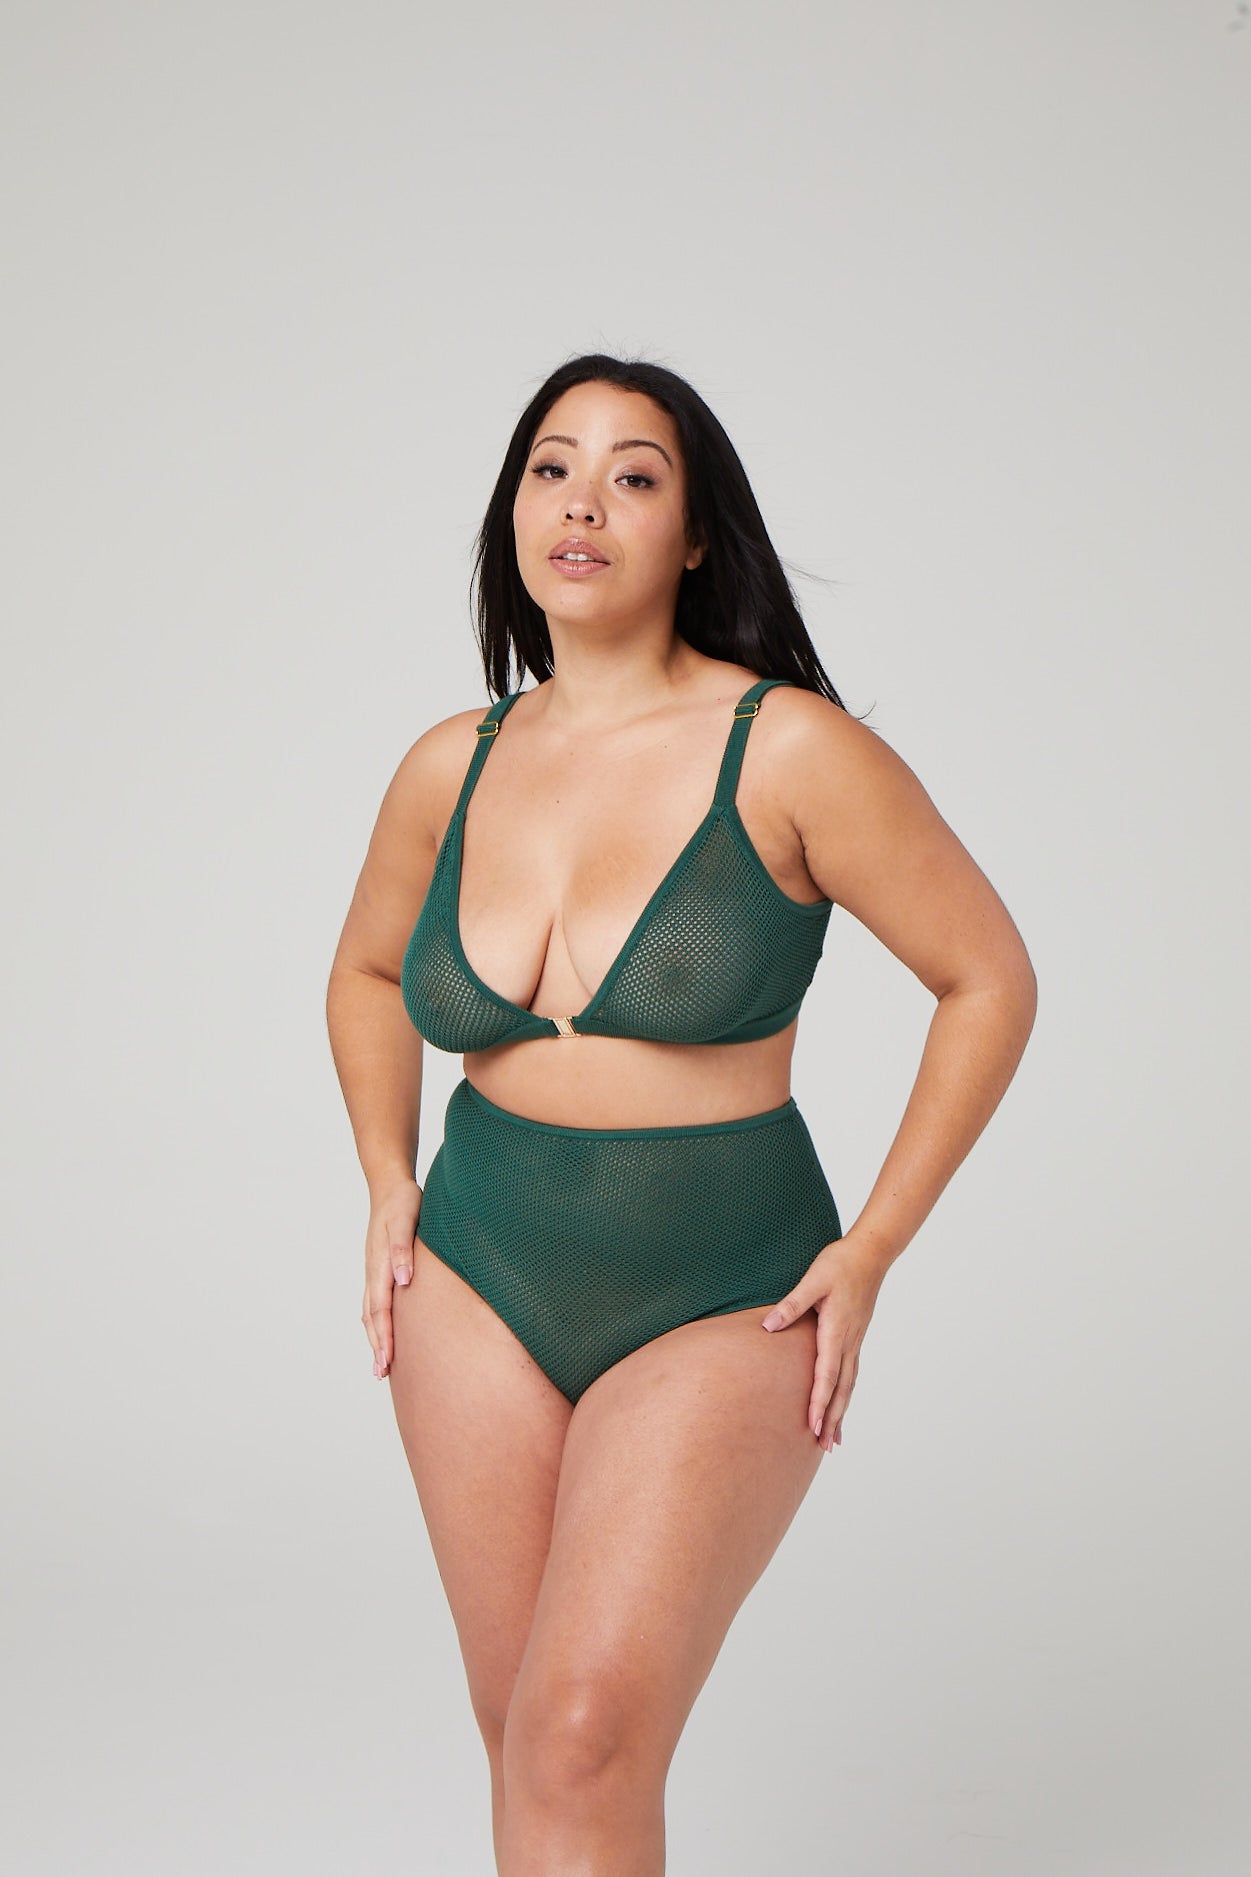 sustainable merino wool bra for larger cup sizes in dark green